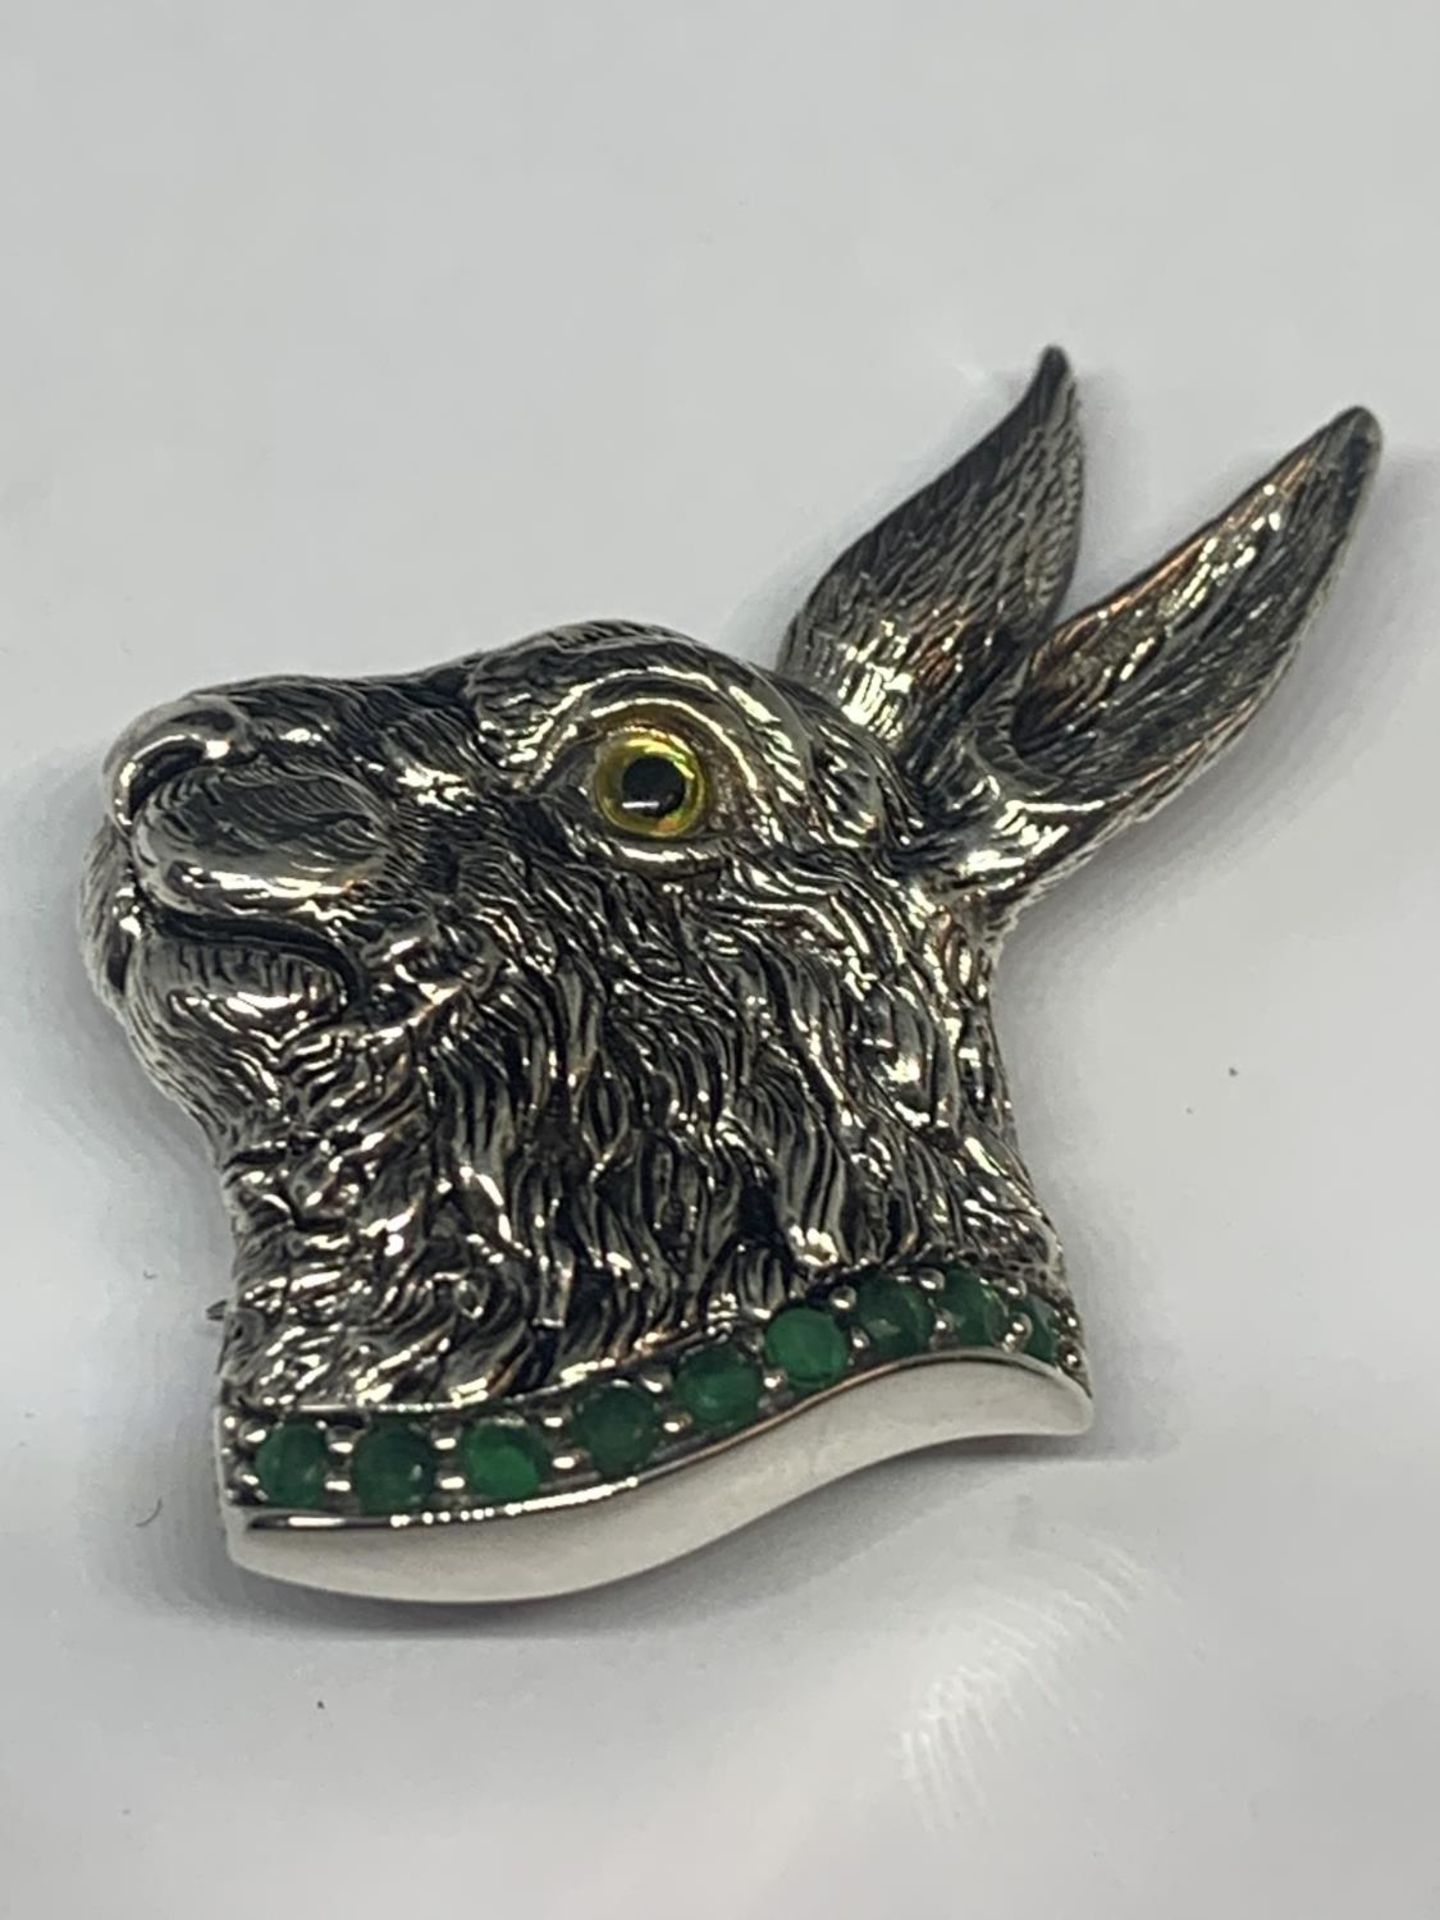 A MARKED SILVER HARE DESIGN PENDANT/BROOCH WITH A GREEN STONE COLLAR - Image 2 of 4